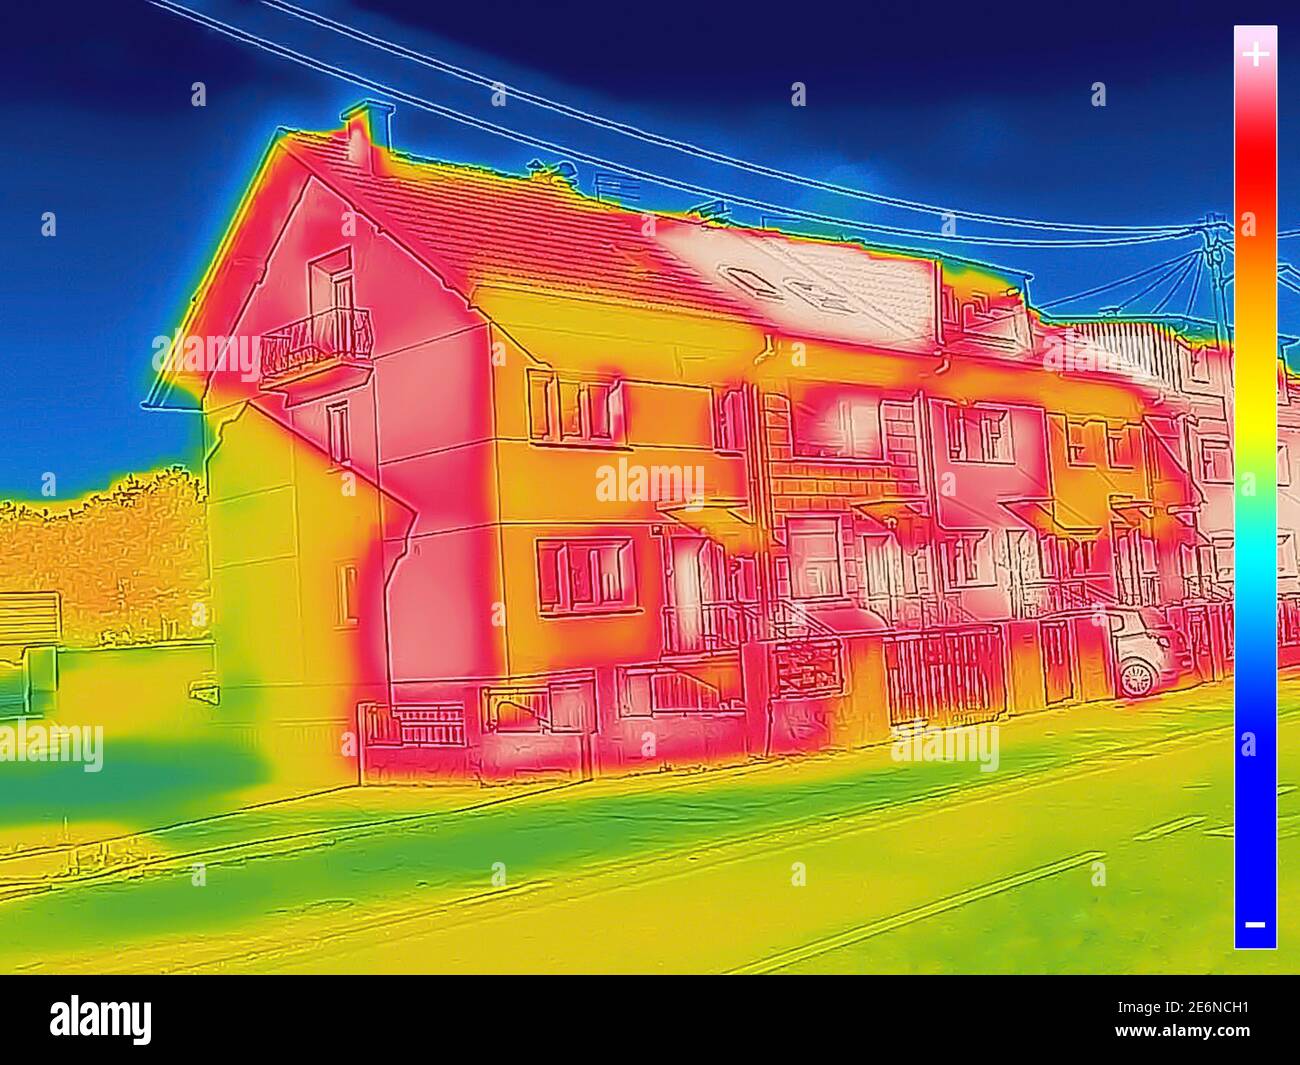 Thermal image showingt Loss at the House Stock Photo